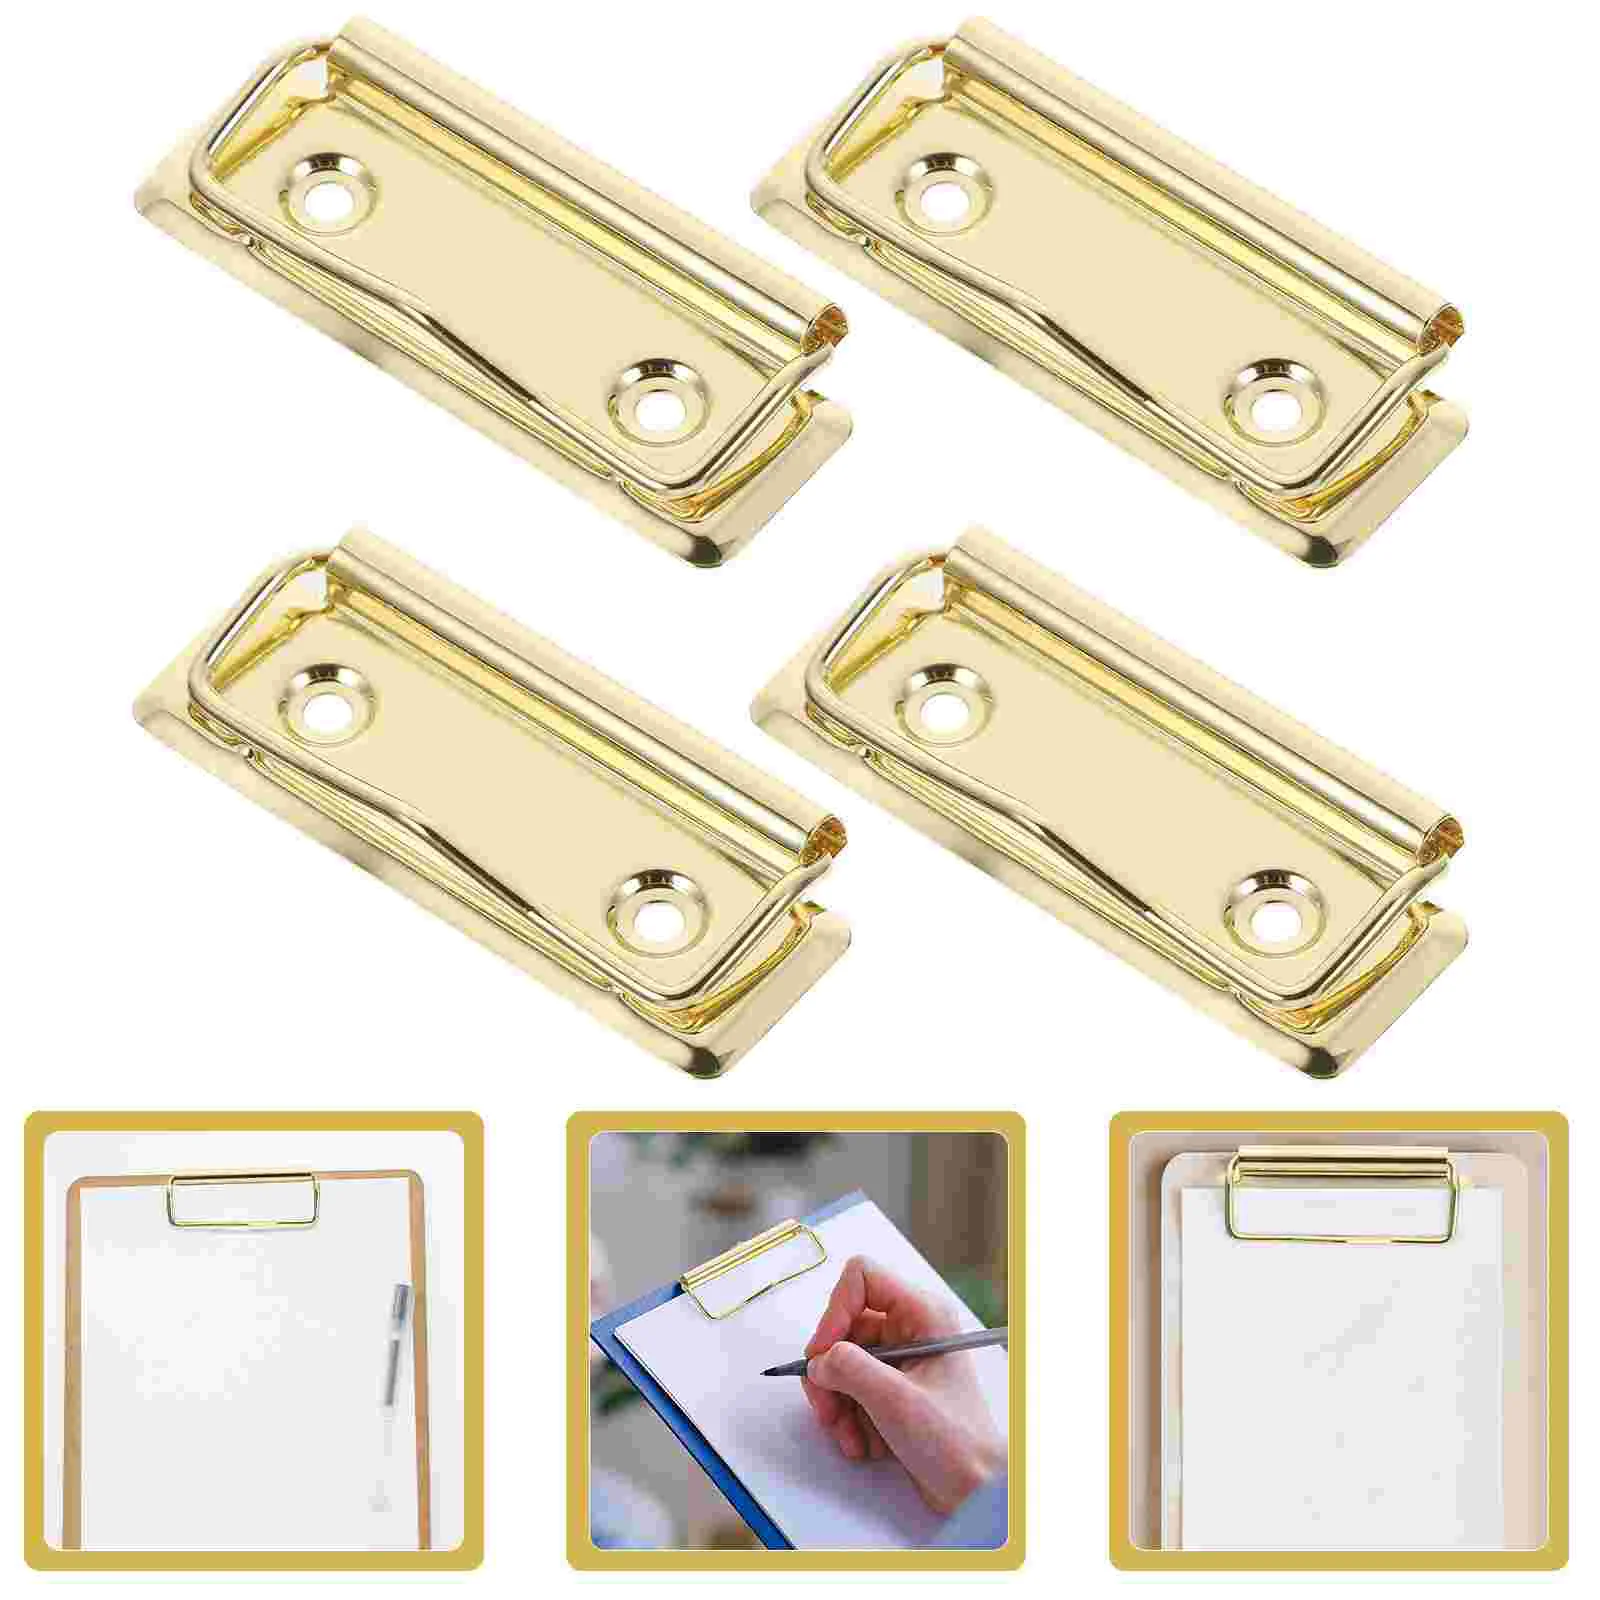 

4 Pcs Stationery Supplies Binder Clipboard Clips Adorable Clamps Large Reusable Replacement Black Writing Pad Holder Bills